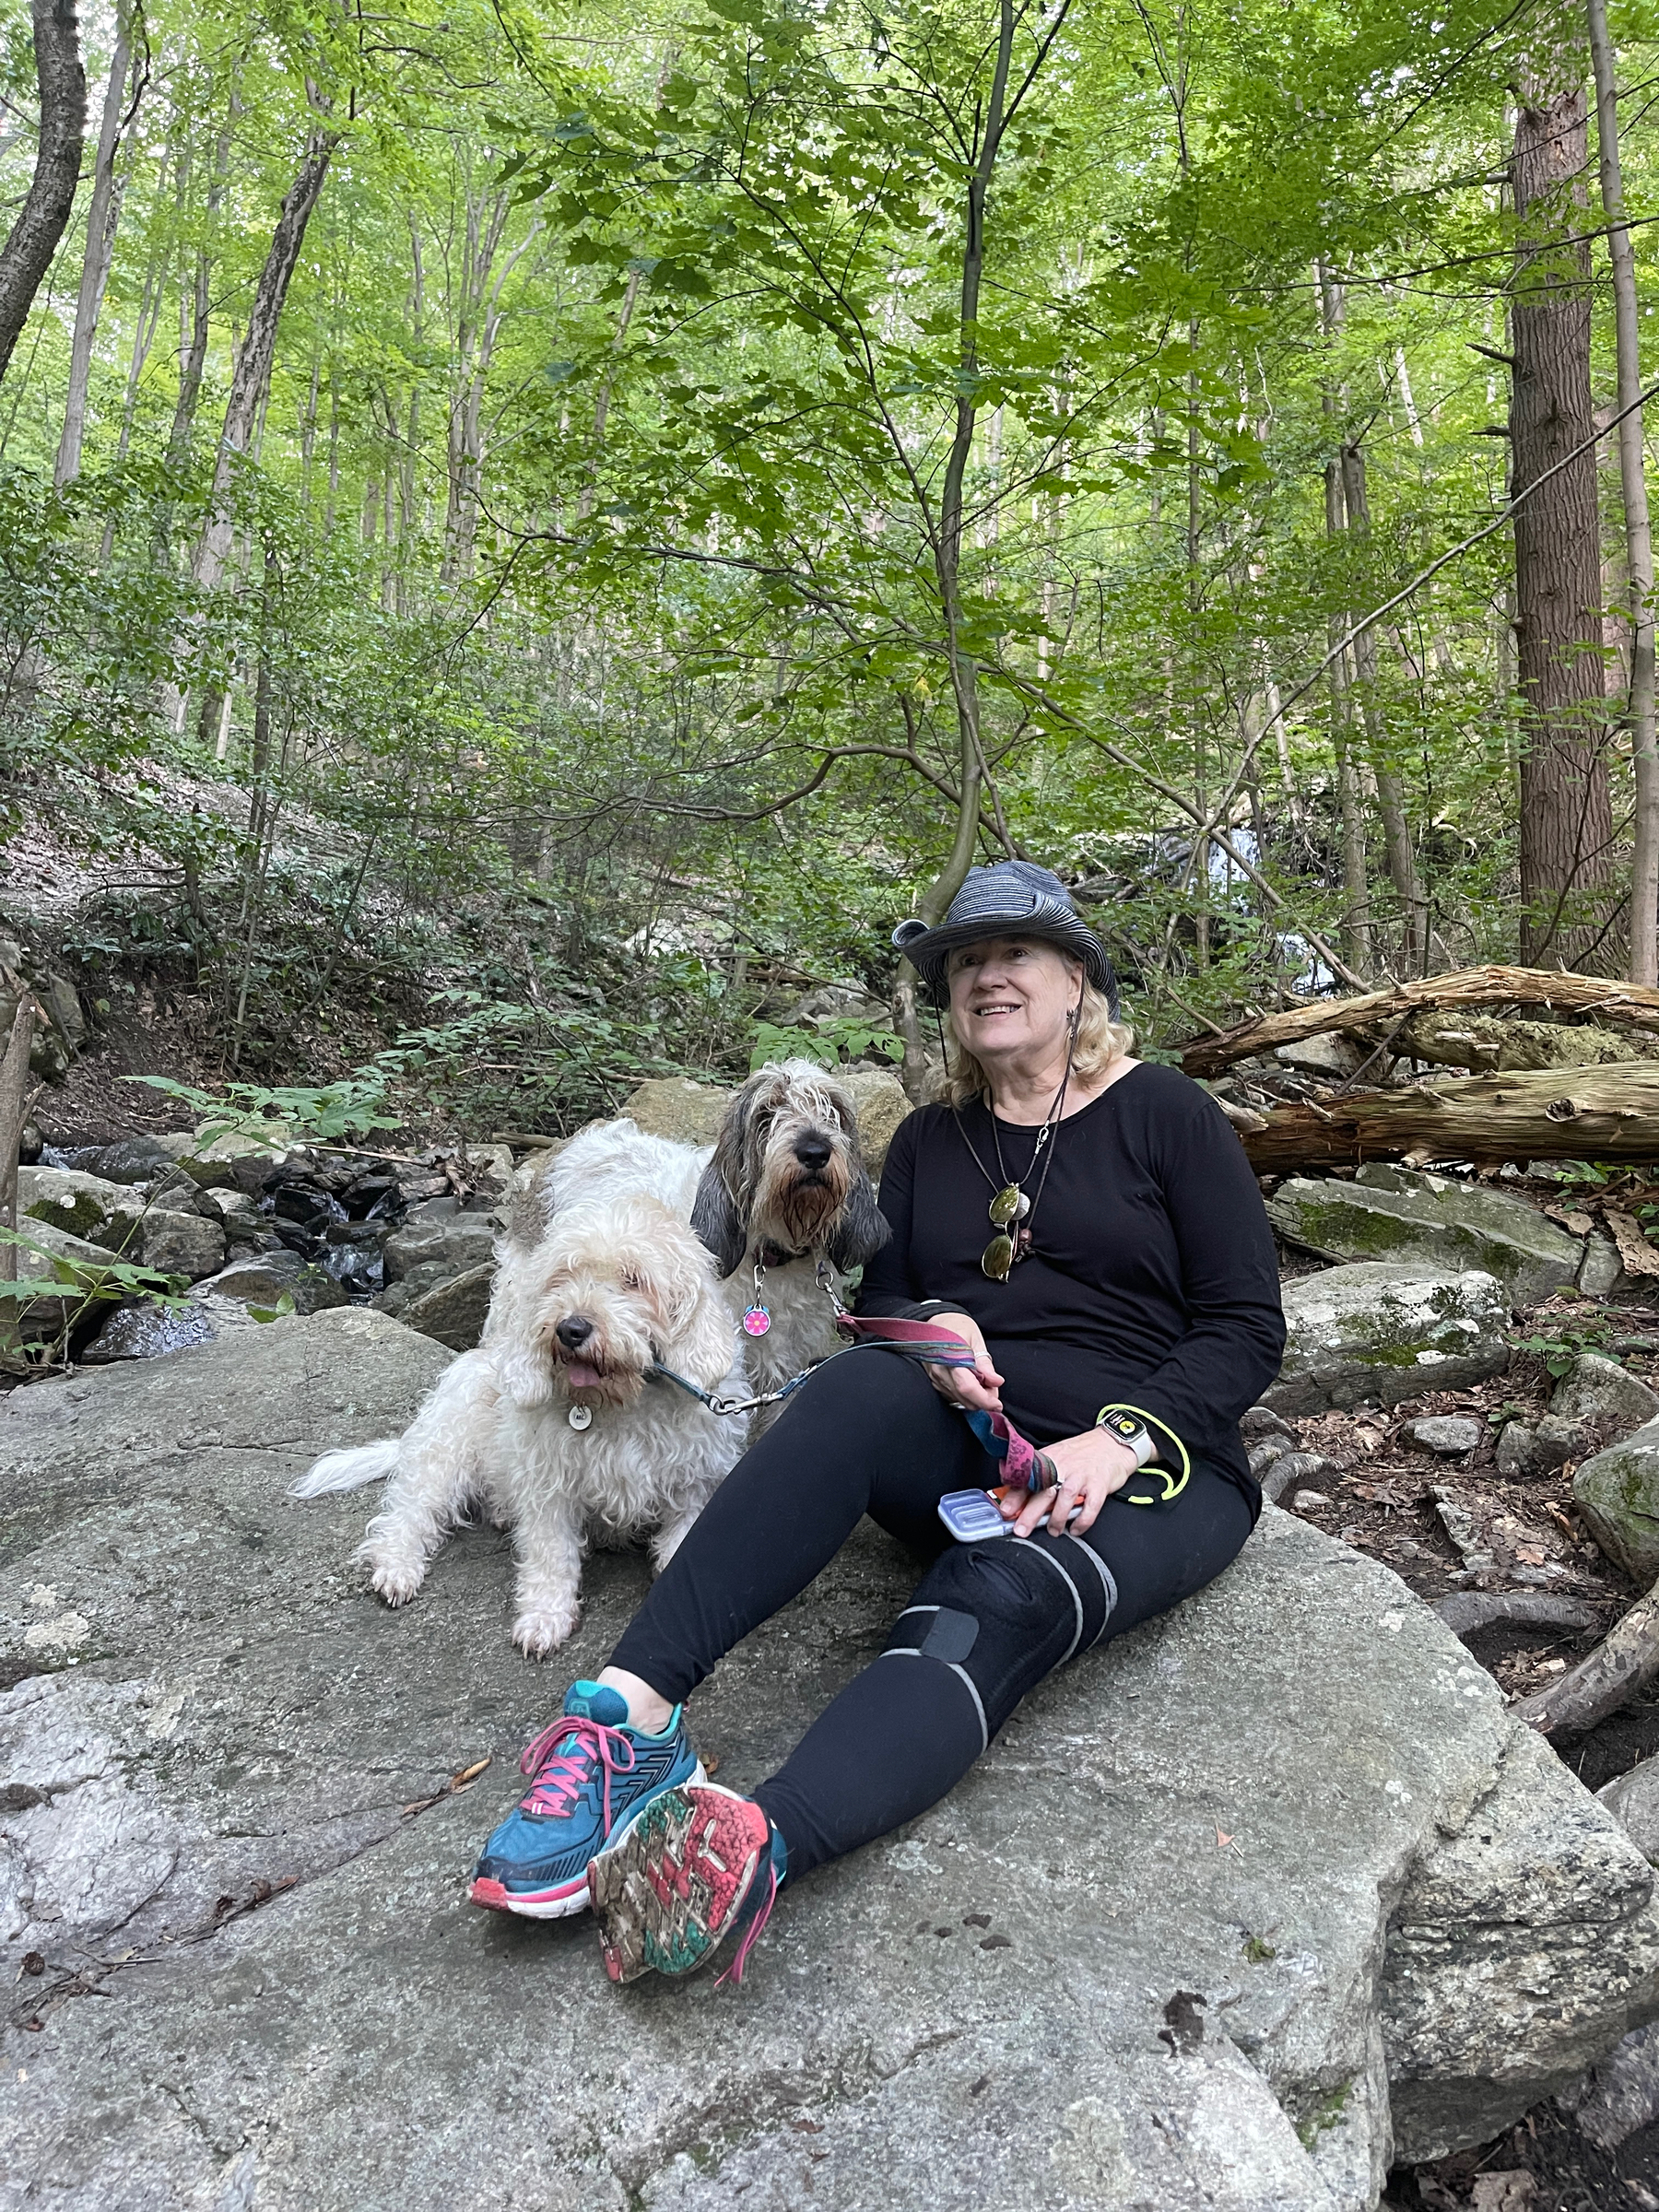 Woman and two dogs sitting on a boulder in a forest.